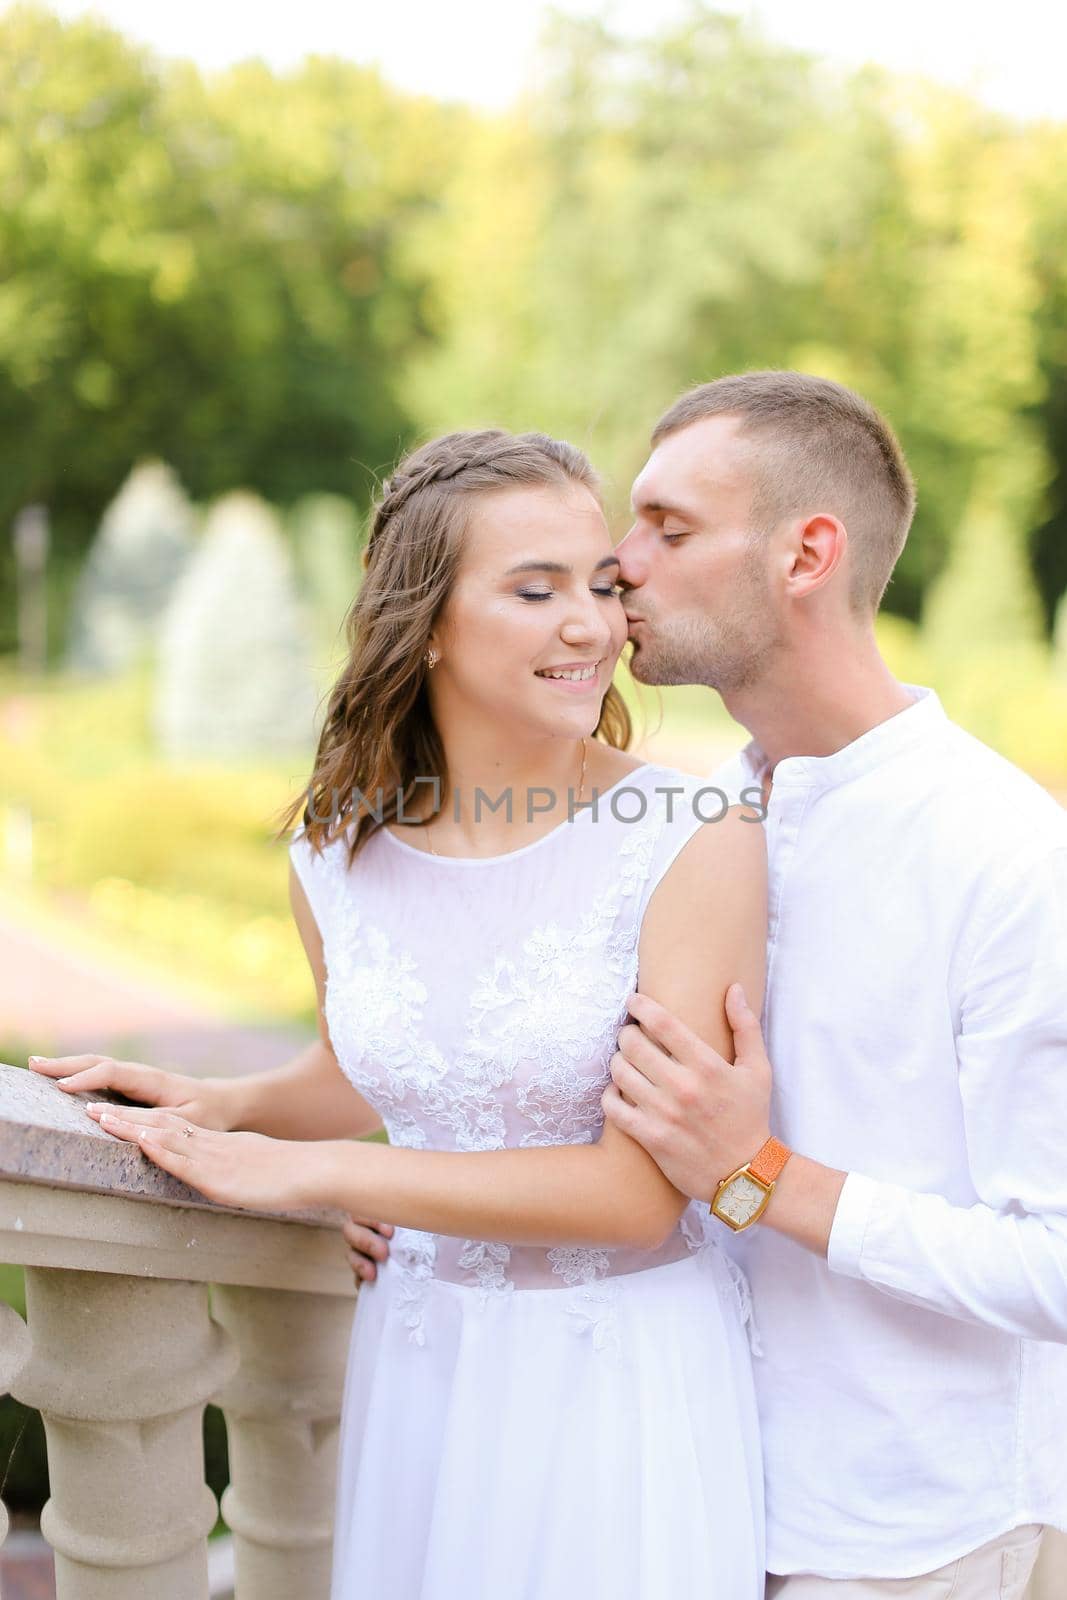 Happy beautiful bride and groom holding each other, kissing and standing outdoors. Concept of relationship, wedding and bridal photo session.